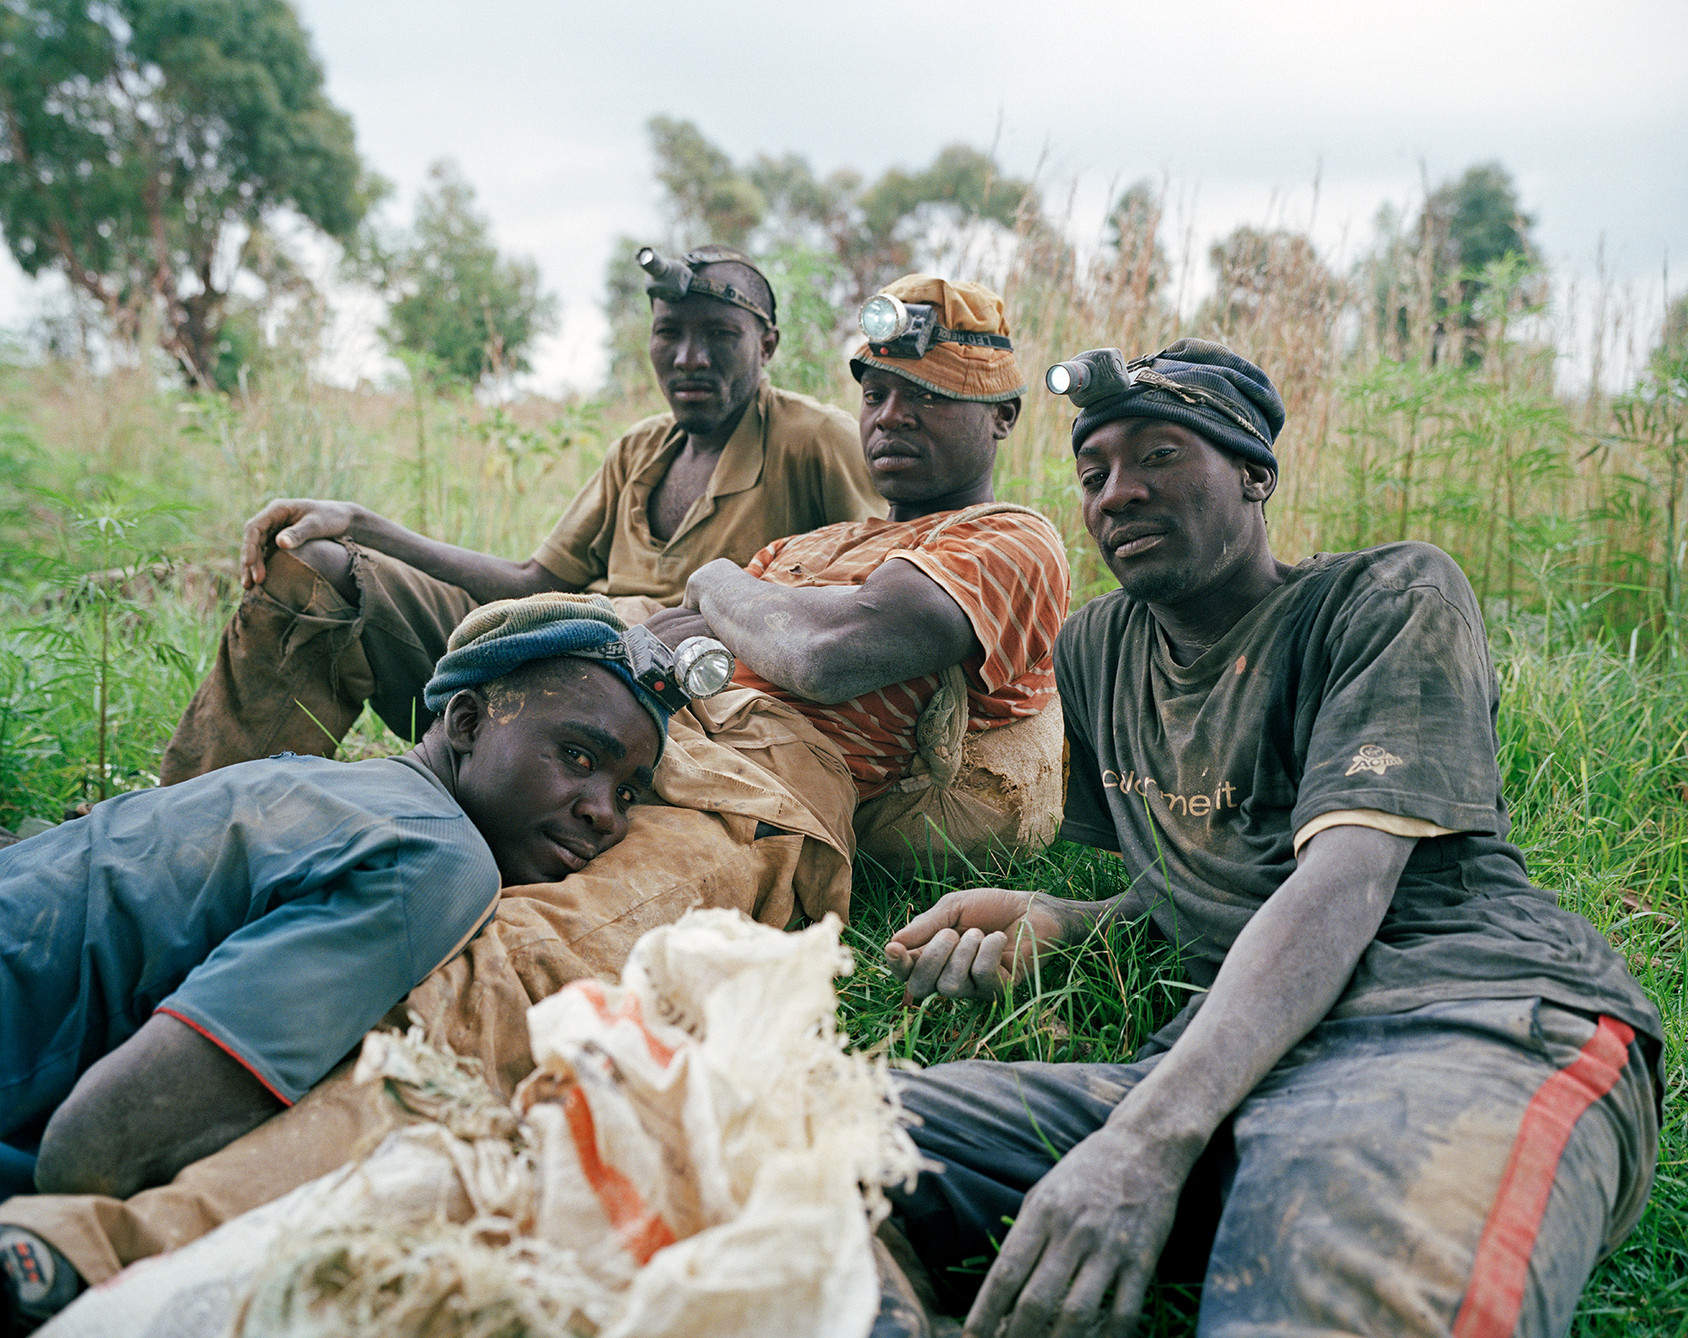 Linda Ndlovu, Danie lMandlo, Dumisani Mahlangu, and Calvin Sibanda, 2013. These four Zimbabwean men, writes photographer Ilan Godfrey, were “highly skilled informal diggers with many years of experience,” respected in their communities for their courage and skills. Godfrey visited their worksite many times to build up the trust required to photograph and name them. © Ilan Godfrey, "Legacy of the Mine".